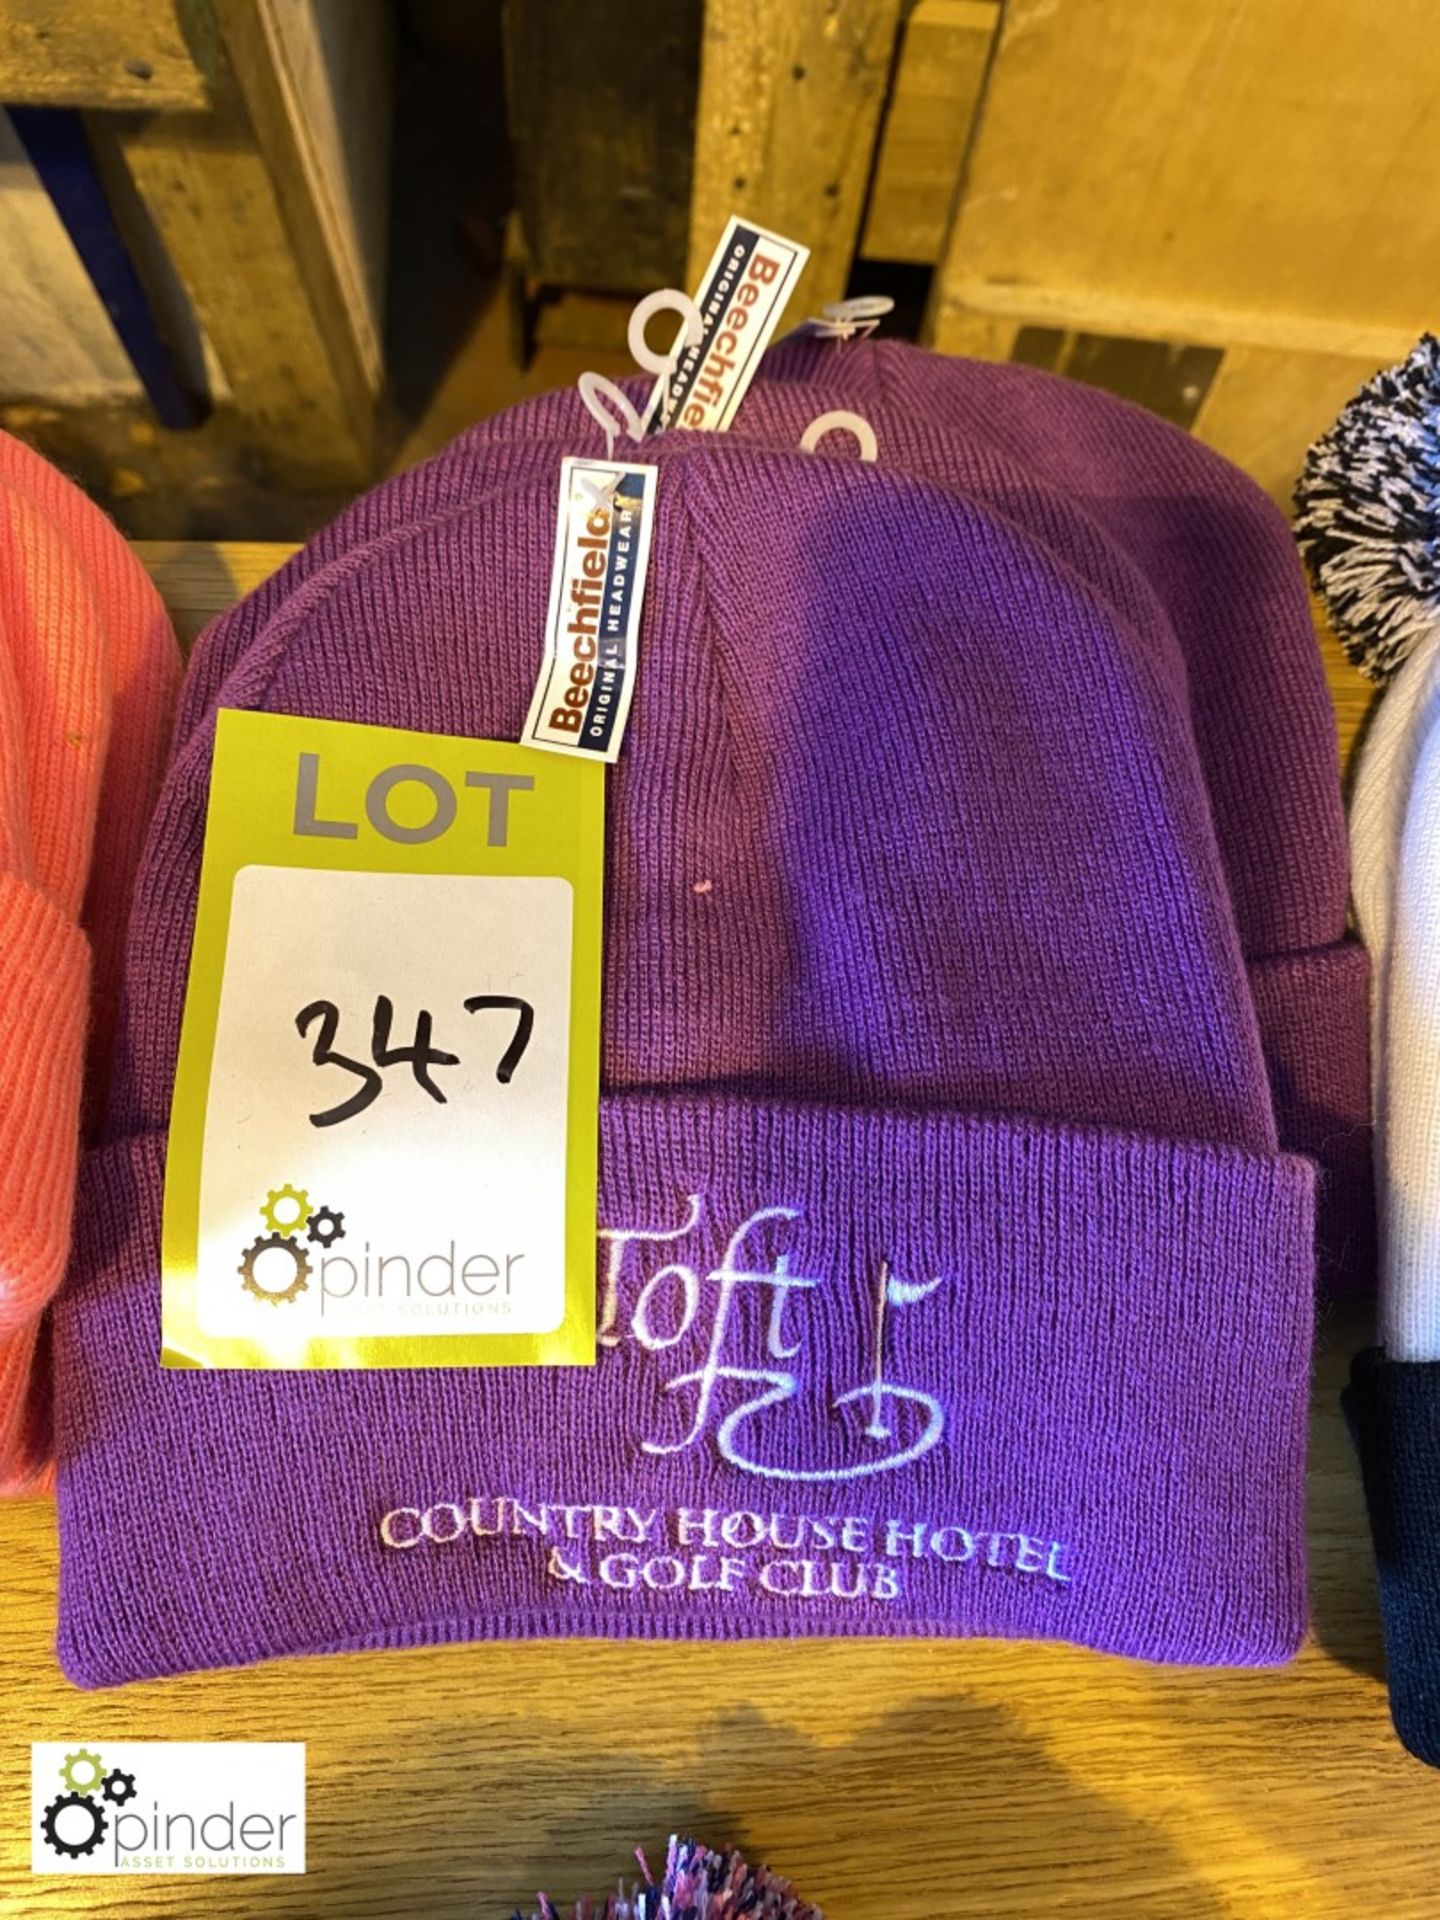 4 Beanies, embroidered “Toft”, purple